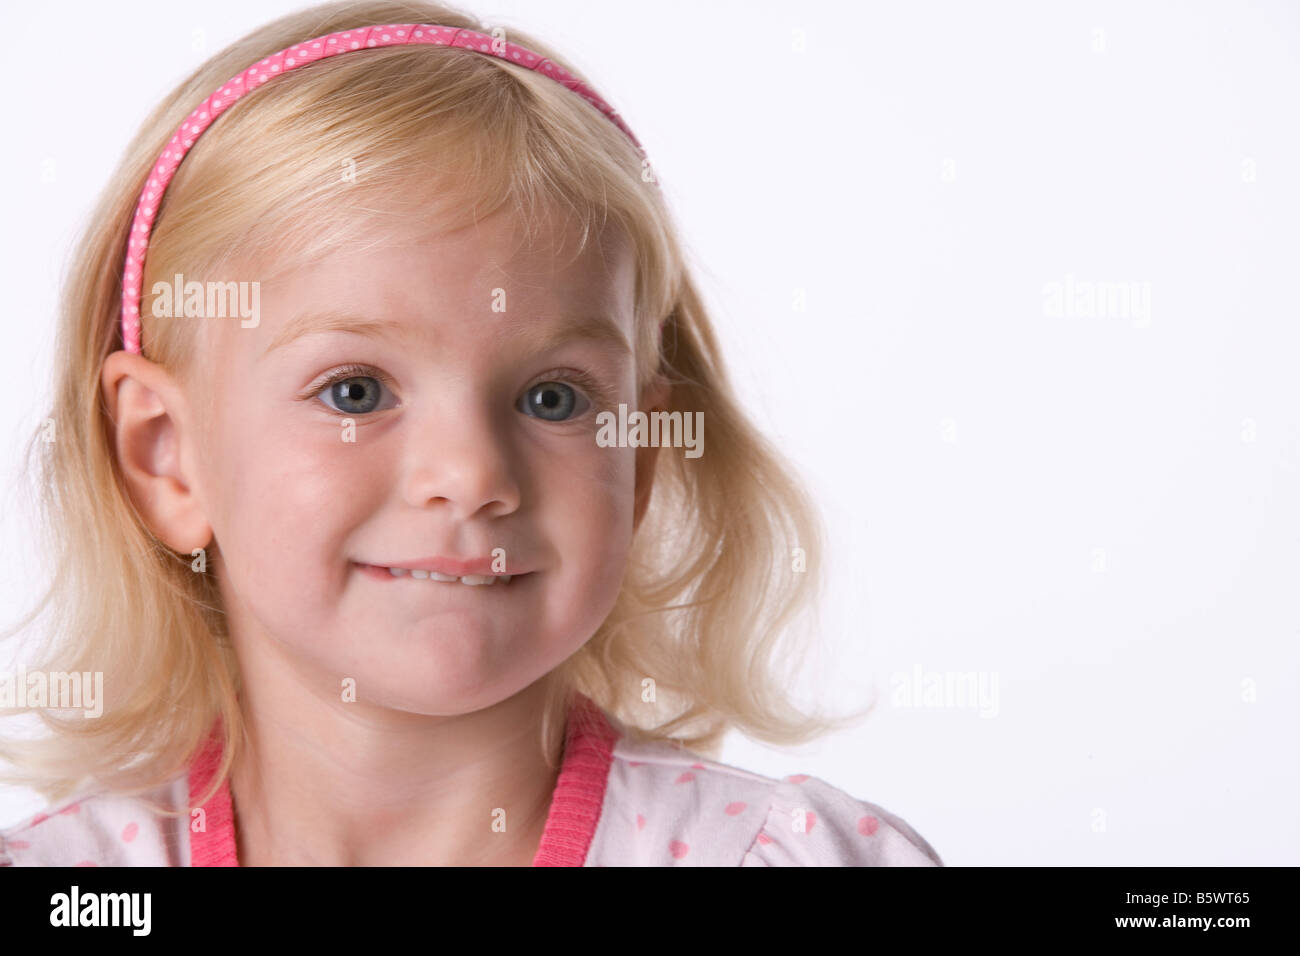 Portrait of a little blond girl biting her lip Stock Photo